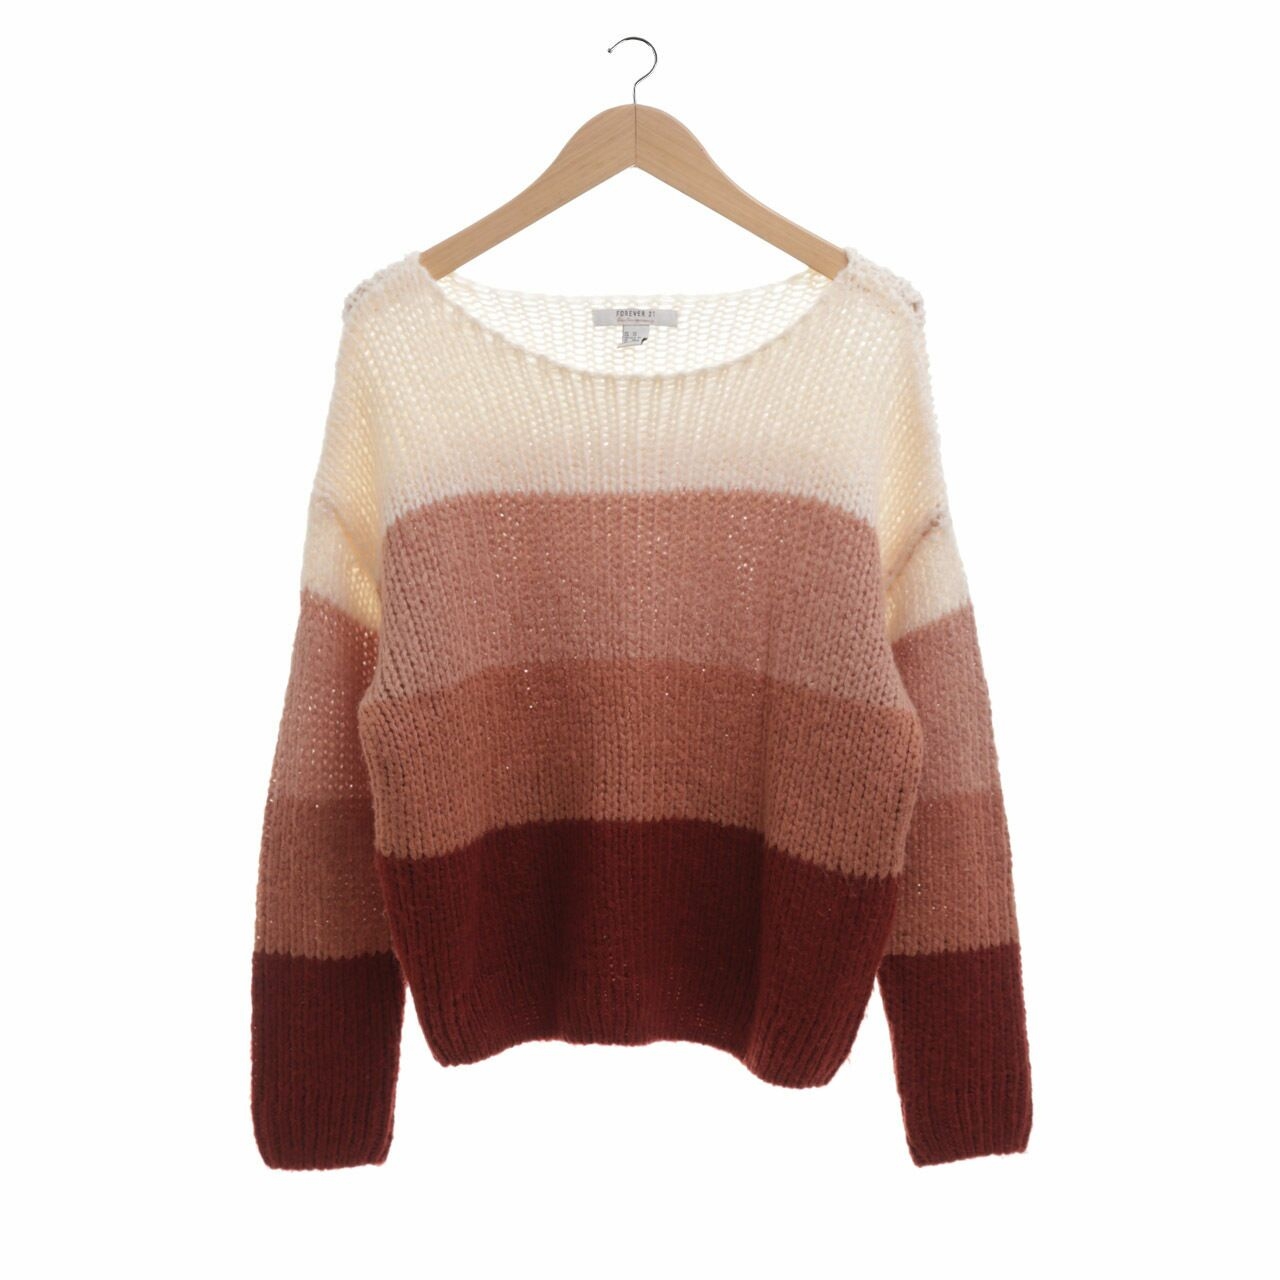 Forever 21 Multi Knit Sweater